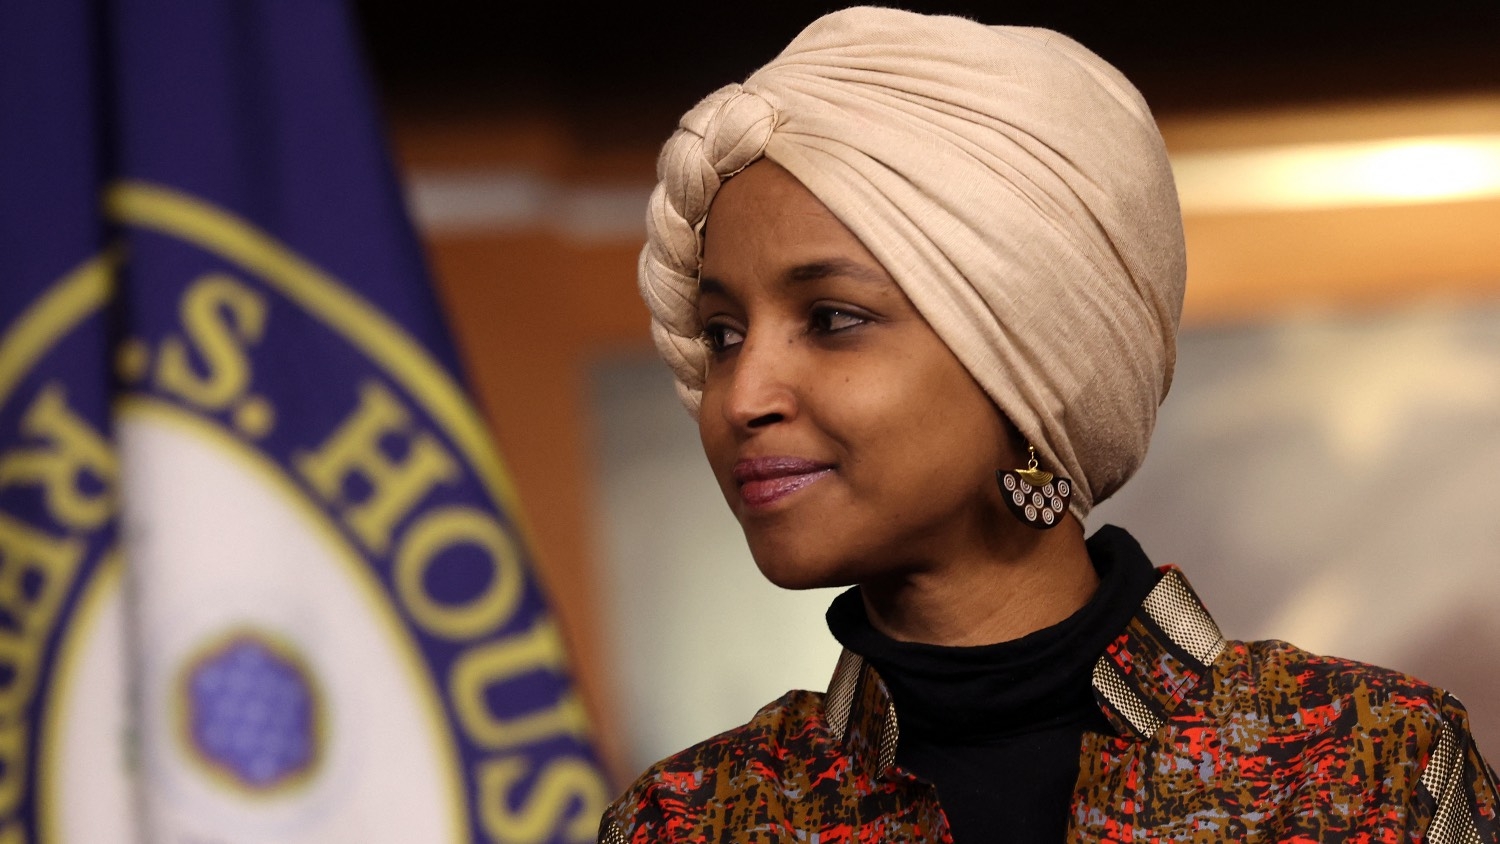 On Thursday, Omar was removed from the House Foreign Affairs Committee, following an effort from Republican lawmakers to oust her over accusations of her being antisemitic.